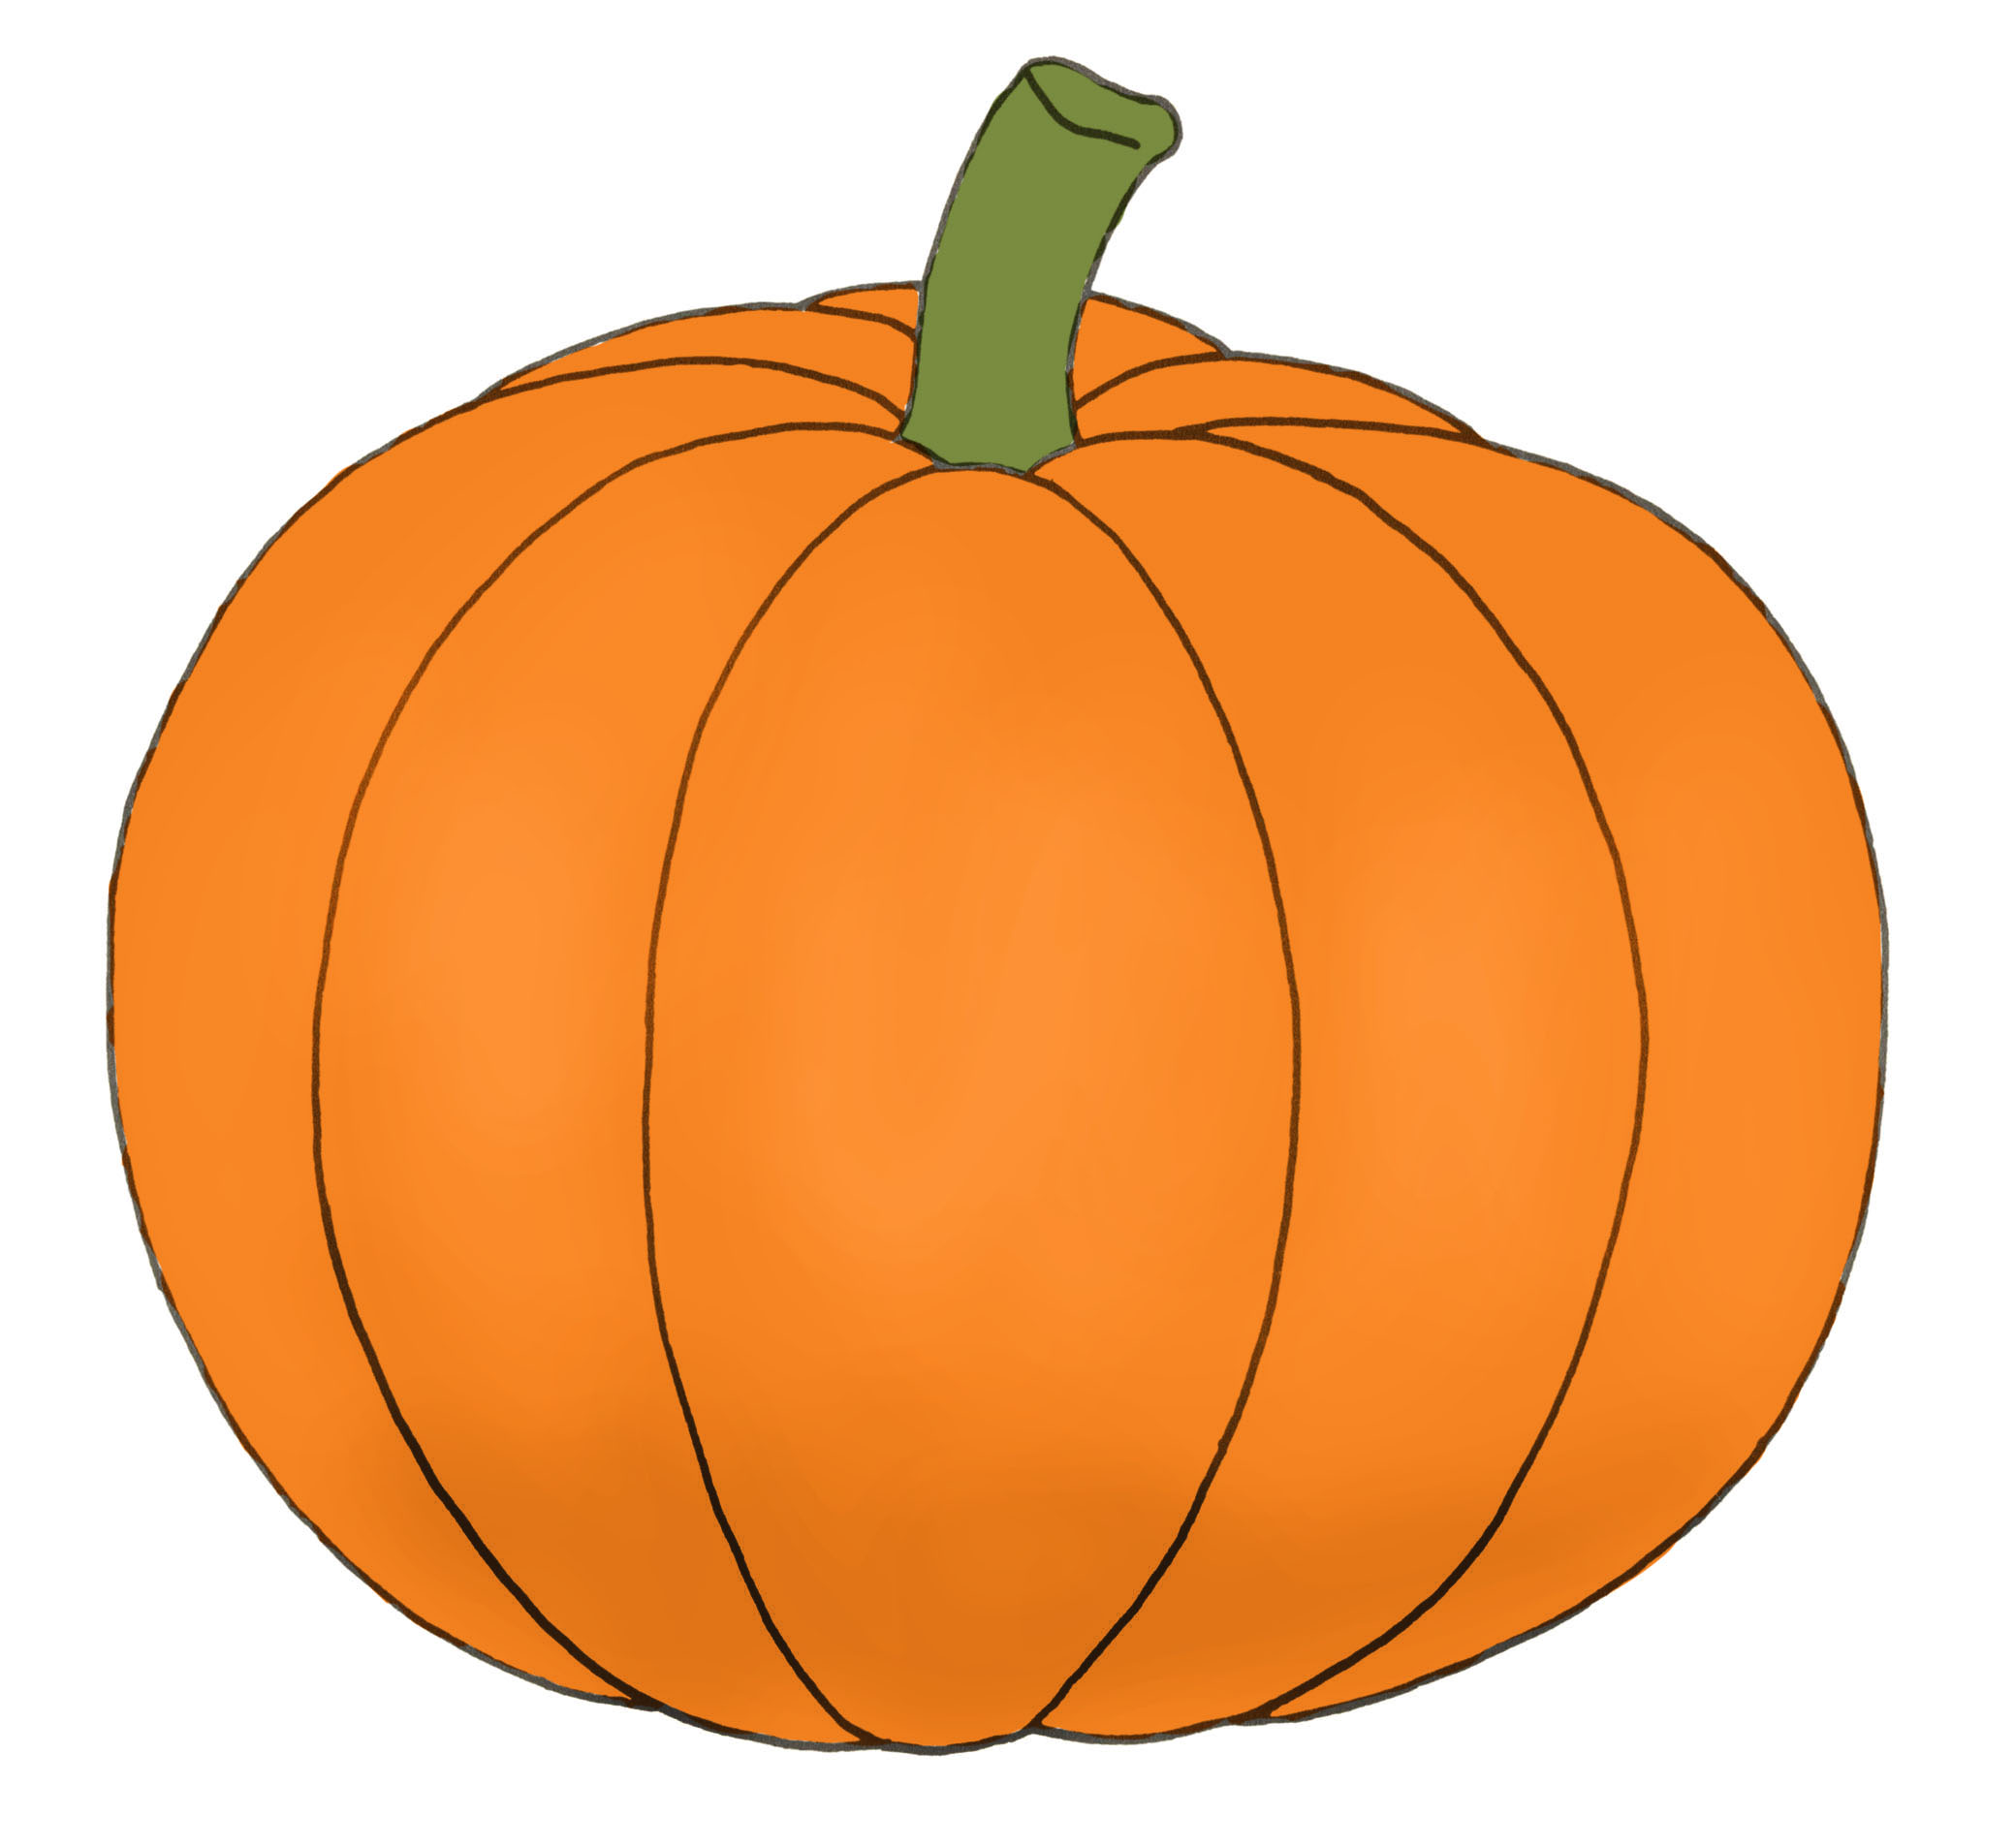 How to Draw a Pumpkin (Easy Step by Step) - Crafty Morning